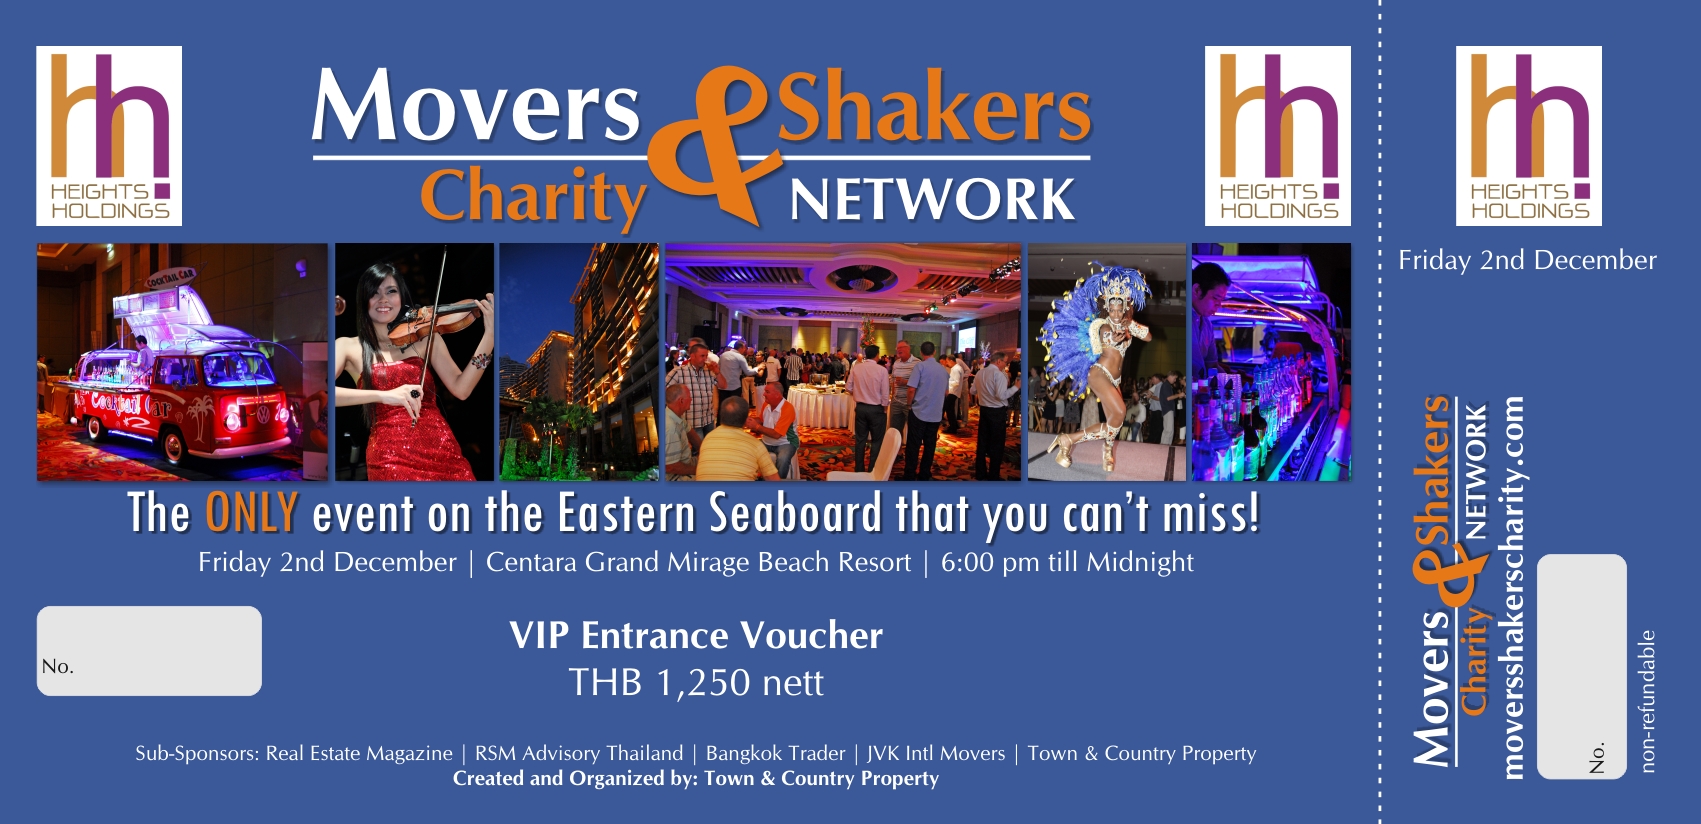 Movers & Shakers 2011